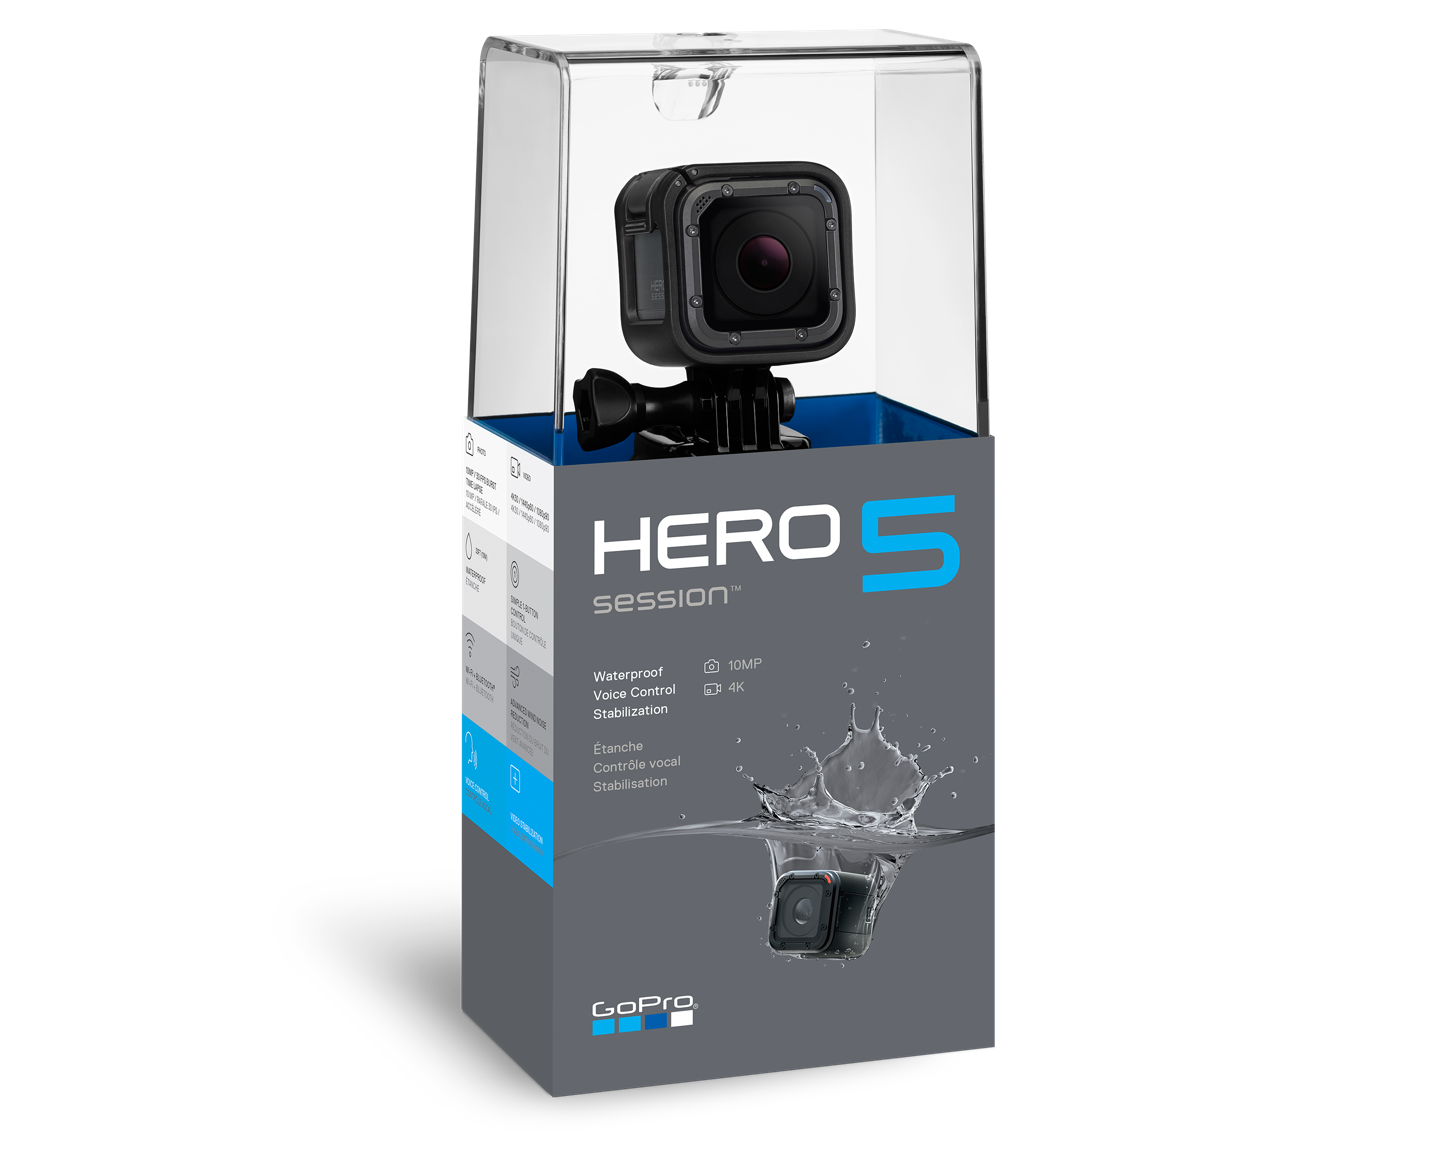 Go pro session 5 waterproof action camera- black